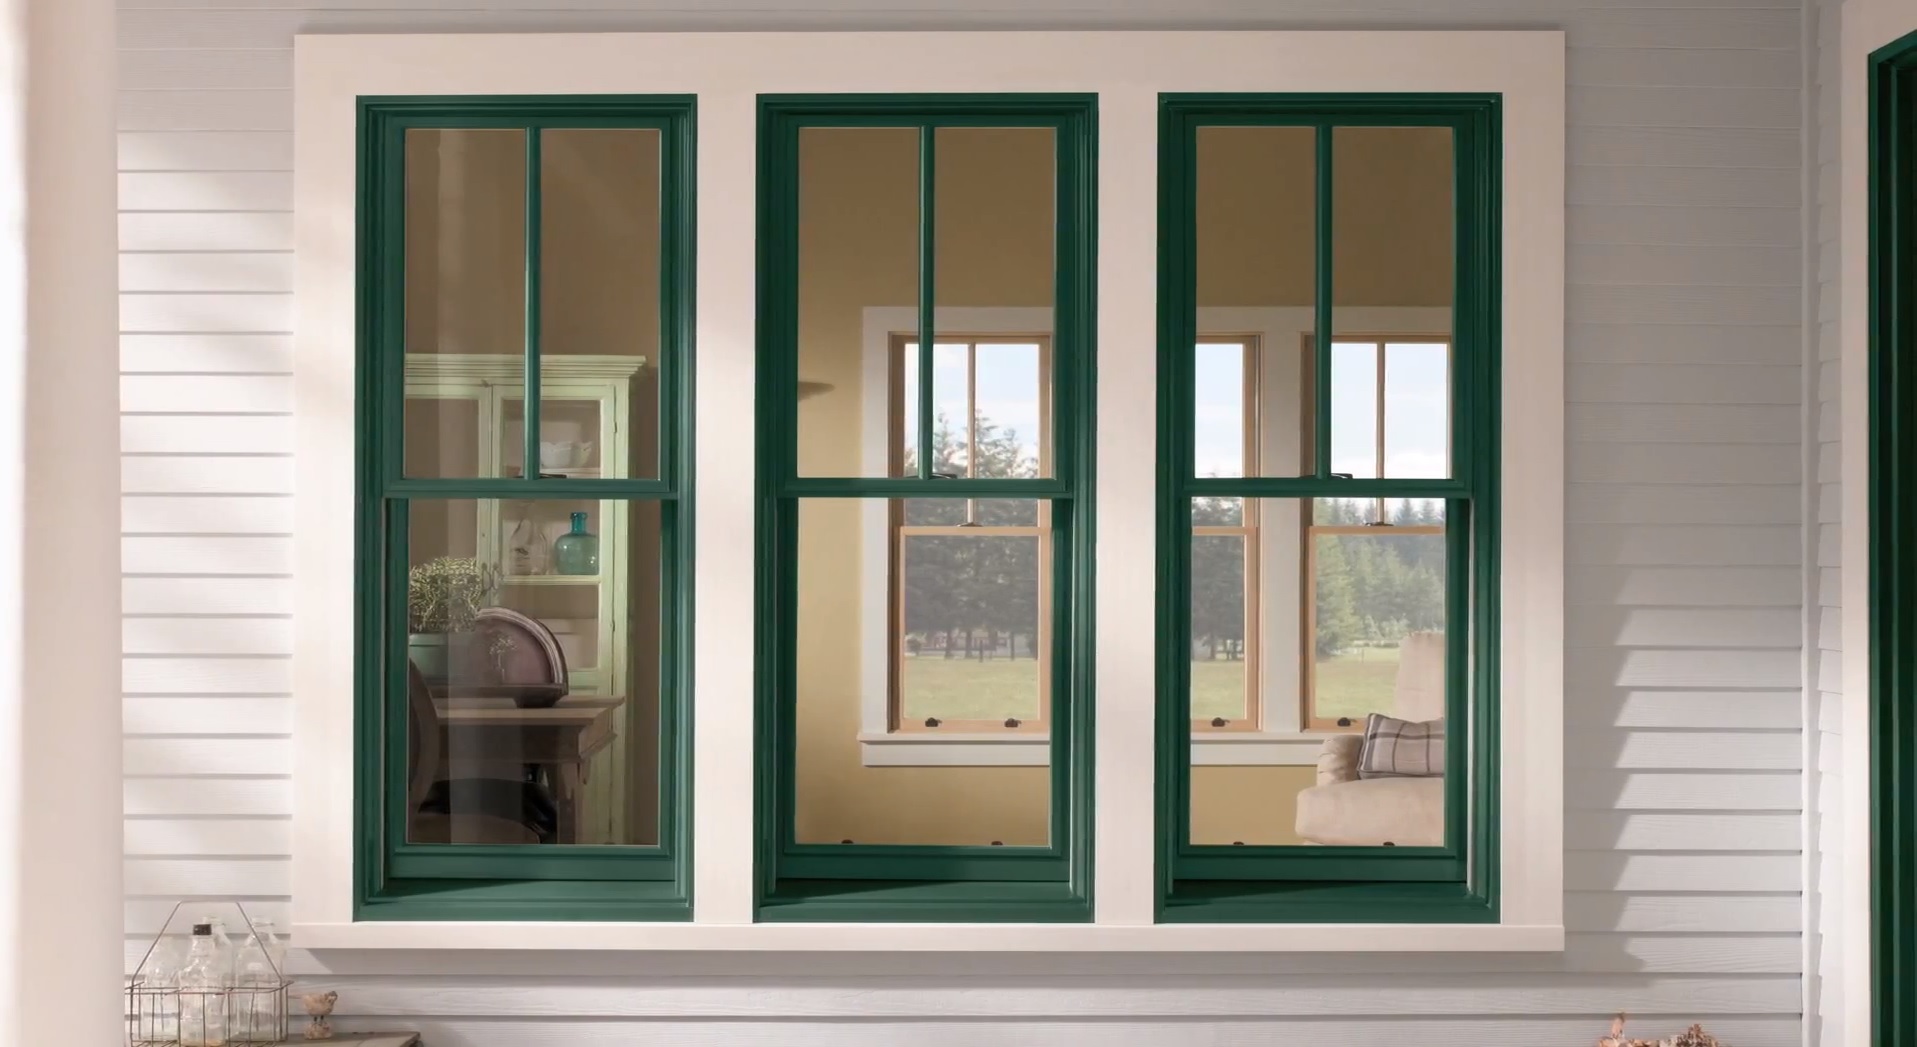 How to choose replacement windows